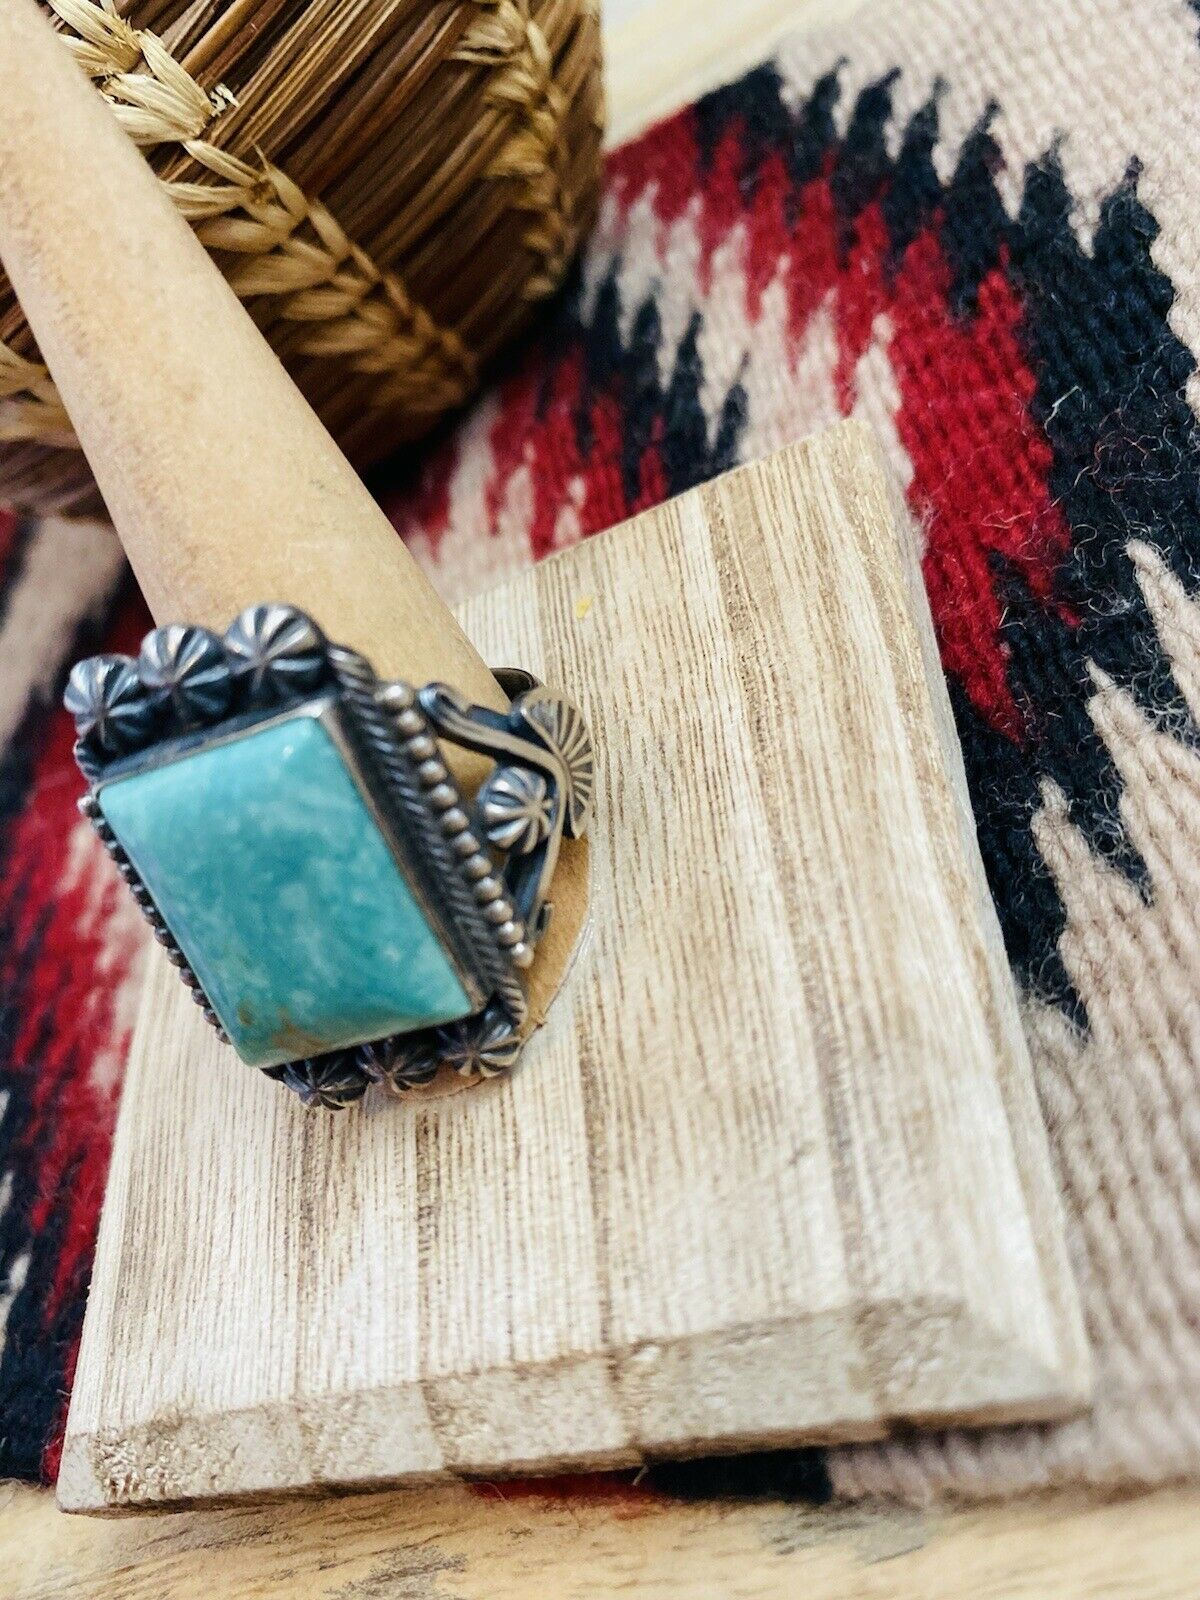 Navajo Royston Turquoise & Sterling Silver Ring Size 12